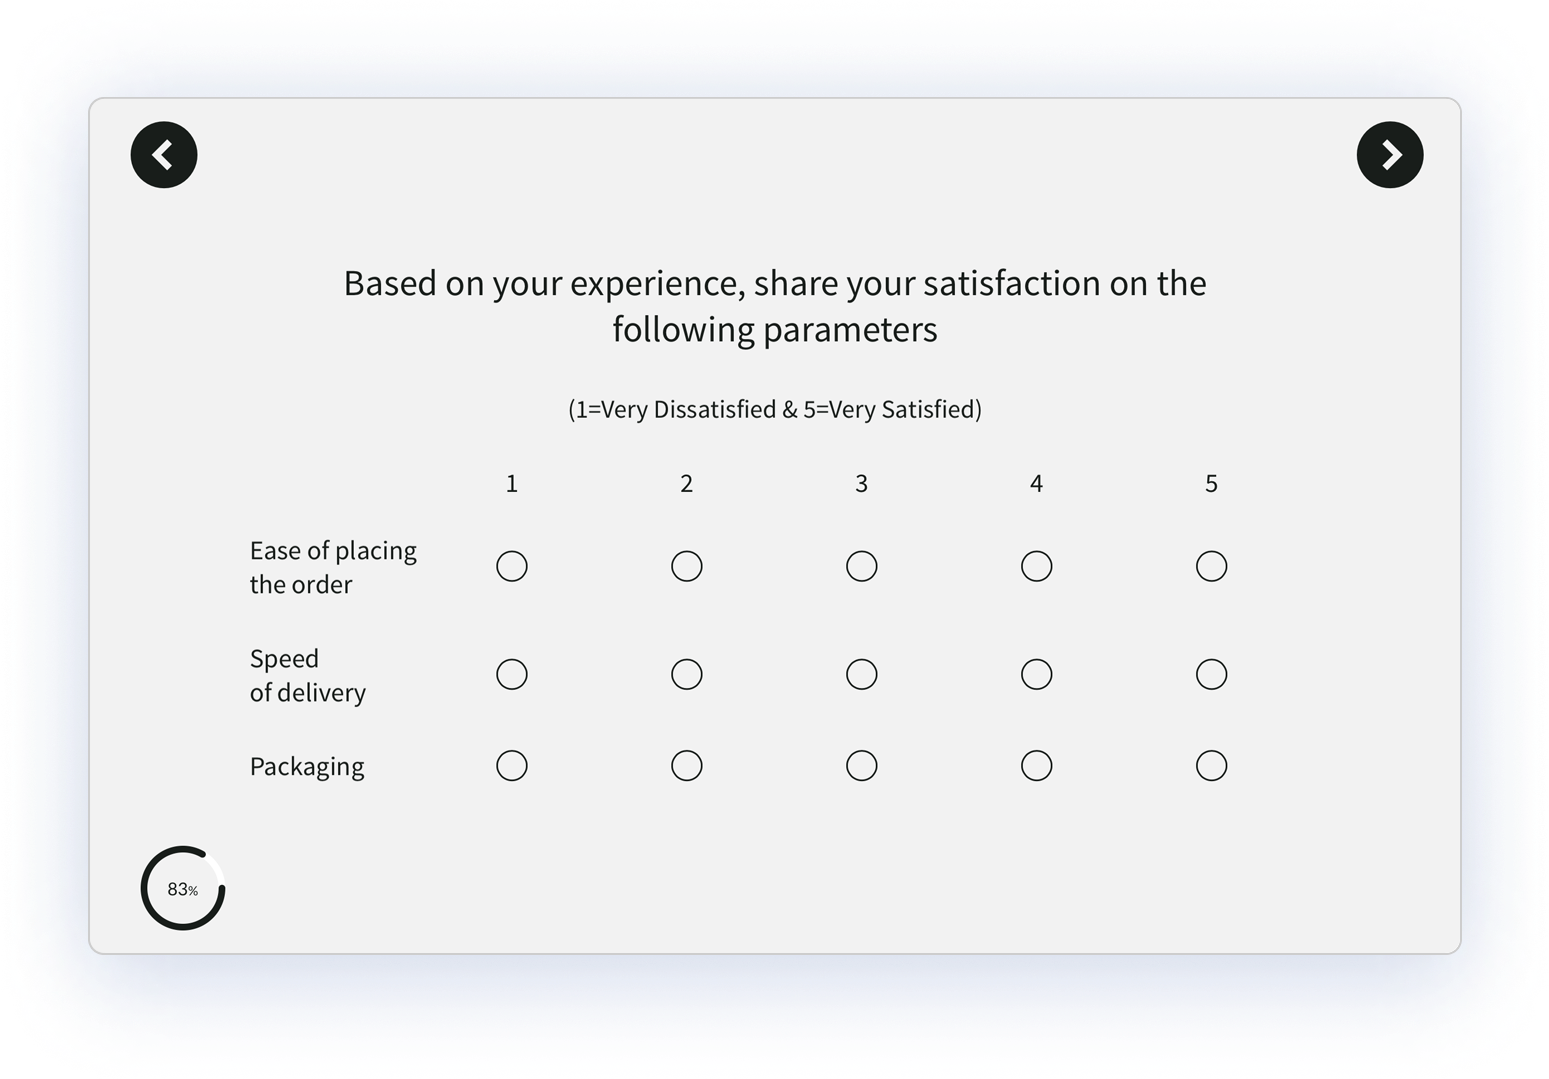 What Works better in your Survey - Scales or Yes/No Styled Questions?